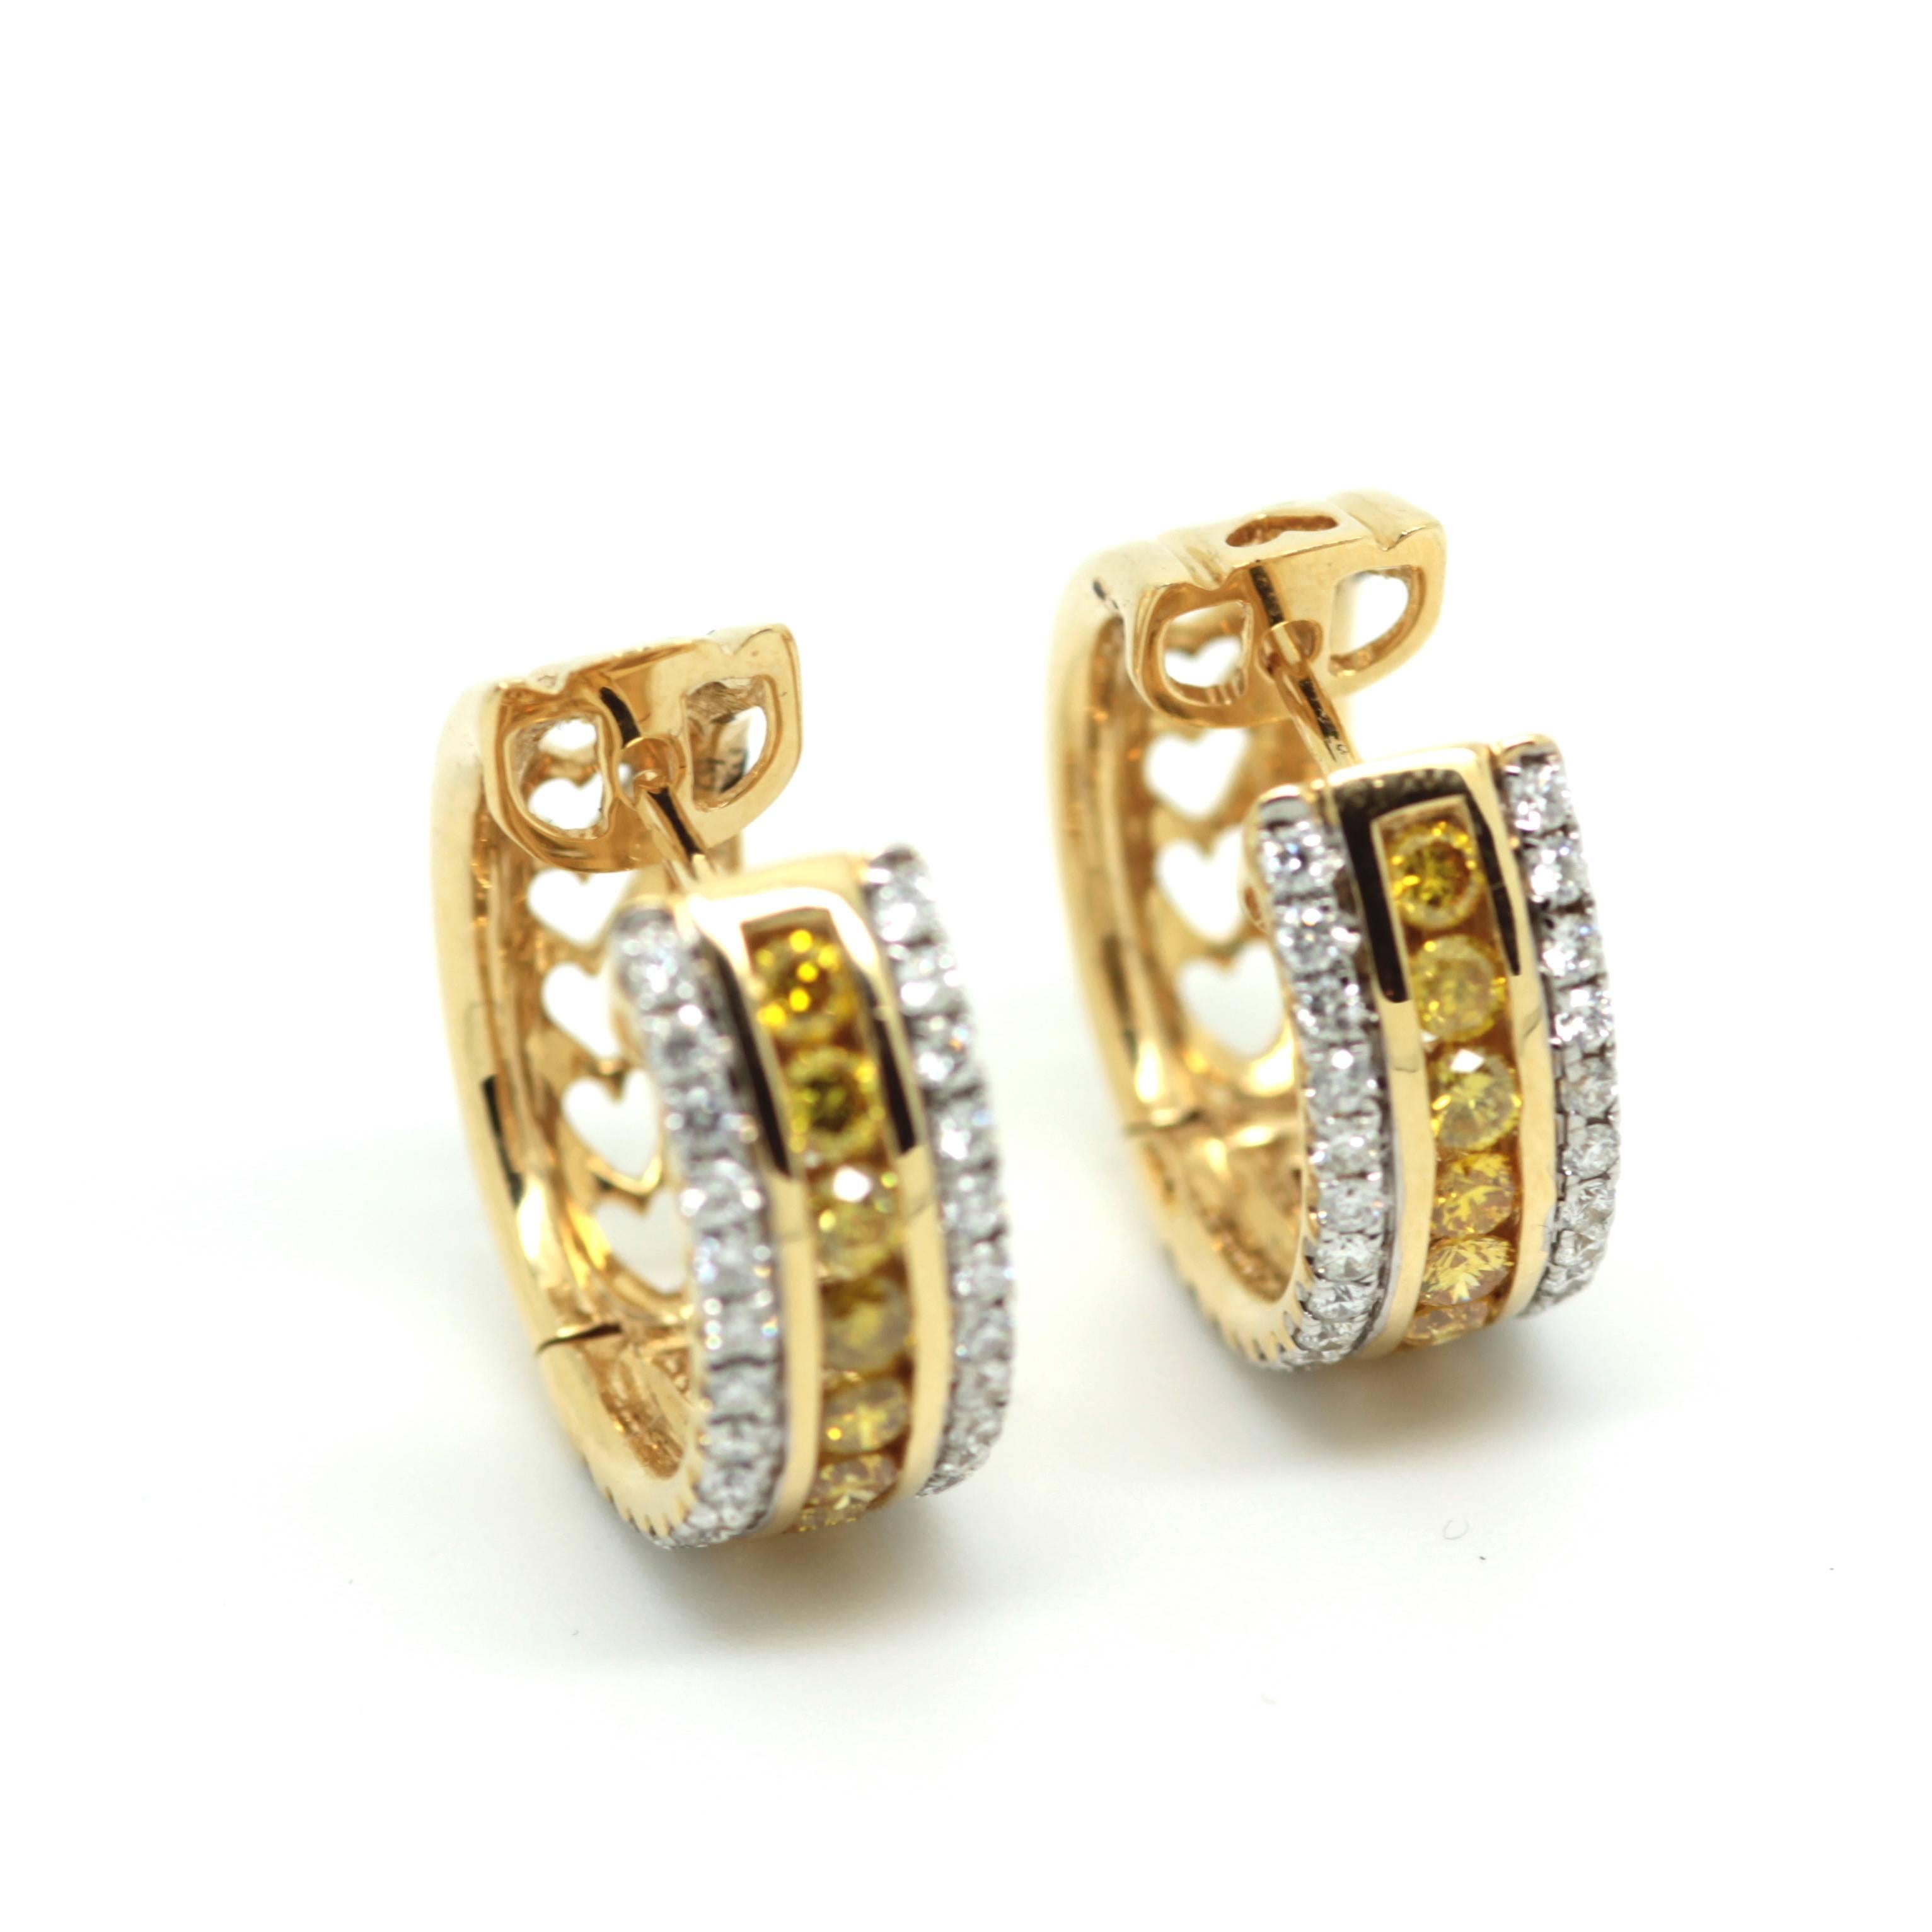 Circular 1.62ct natural fancy yellow and white diamond earrings set in 18k yellow gold.  Price: £ 5950
